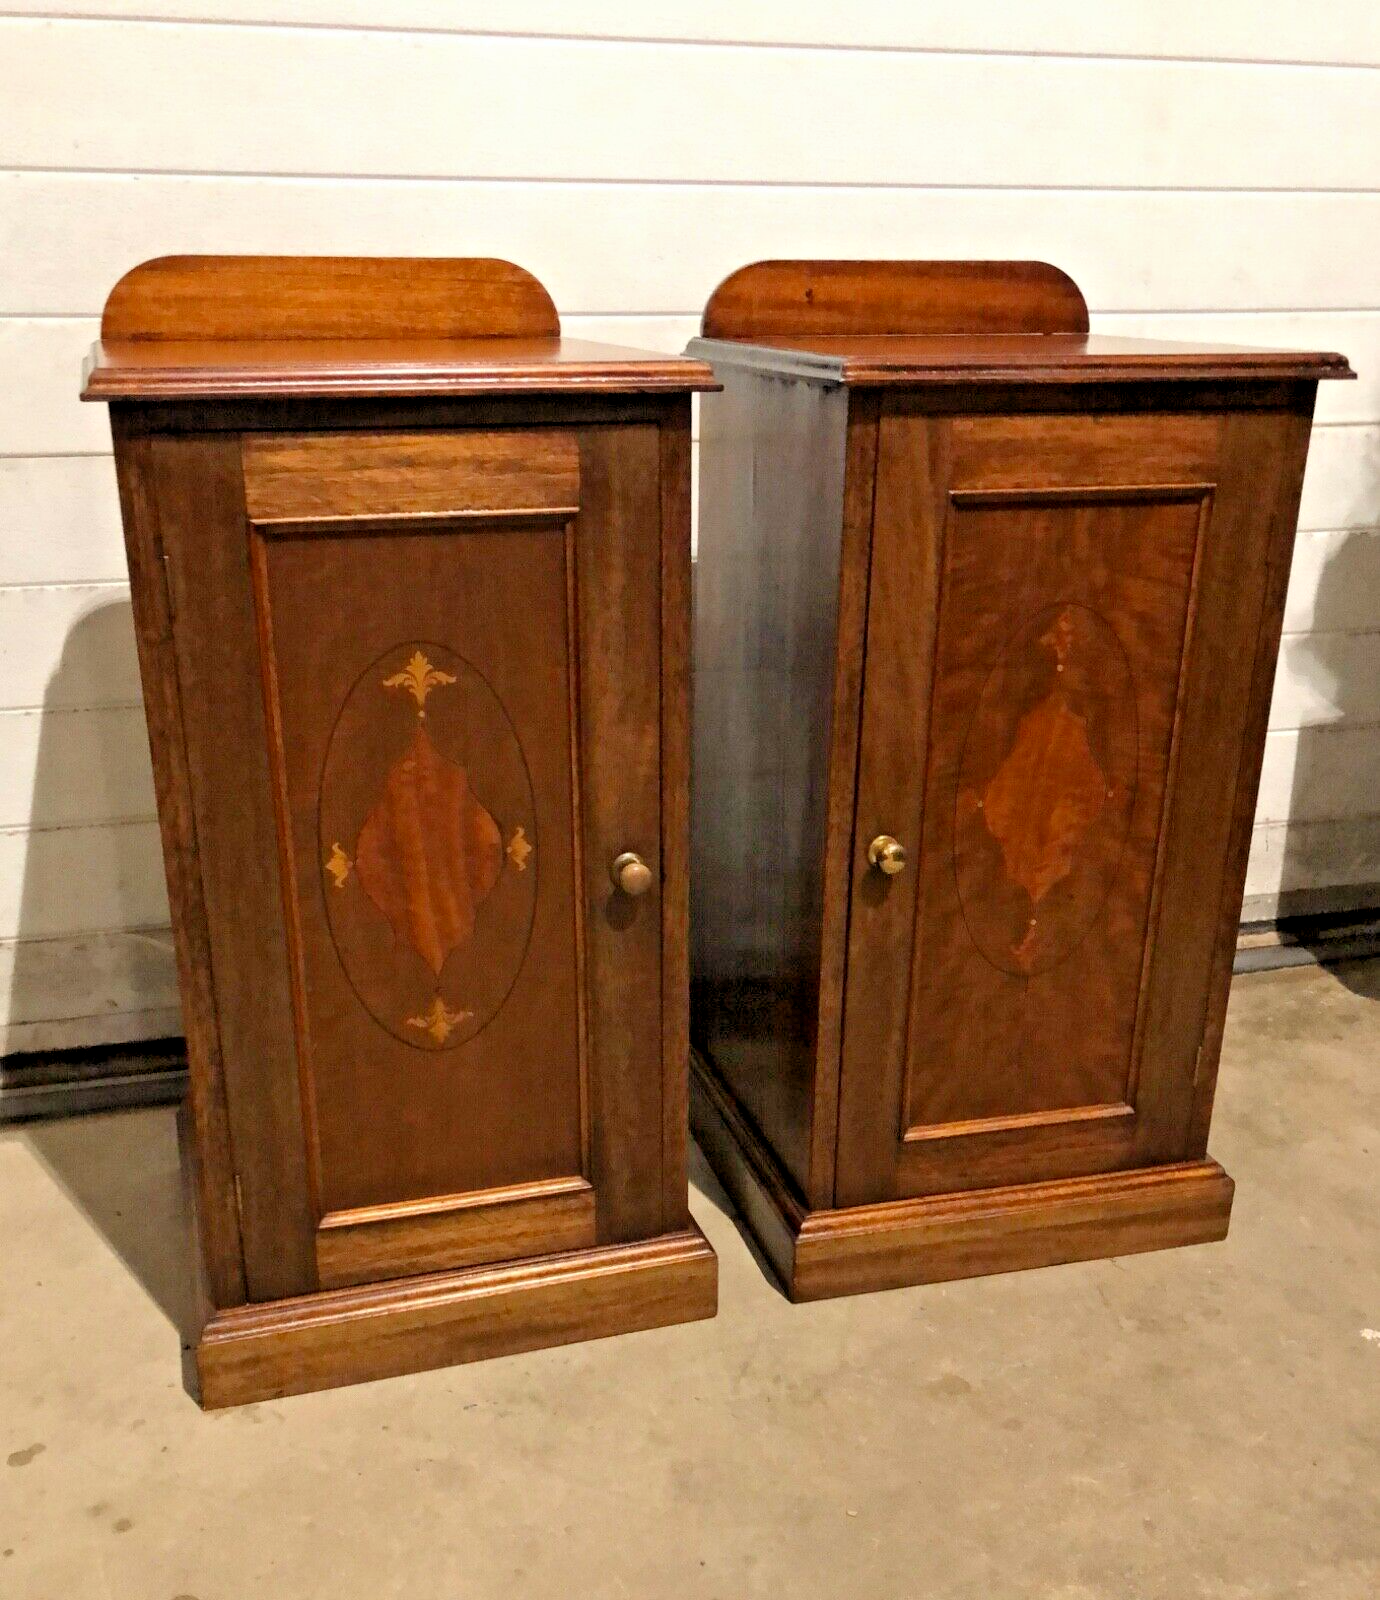 000803....Handsome Pair Of Vintage Mahogany Bedside Tables  ( sold )